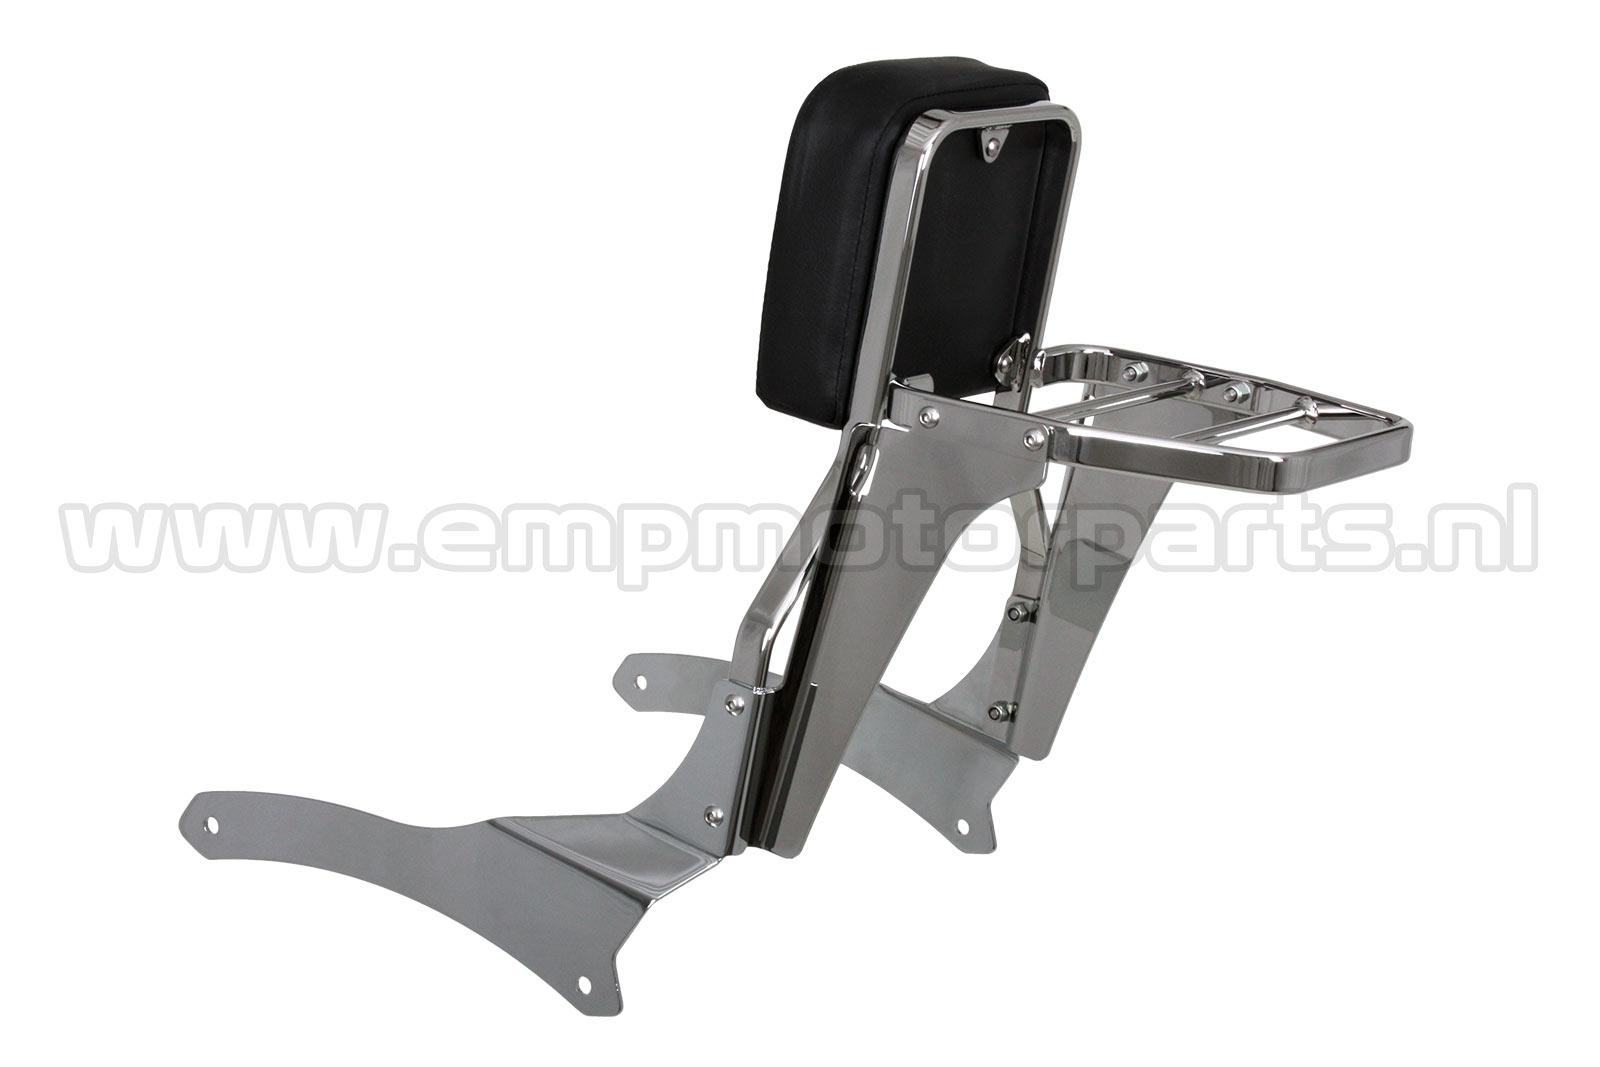 Luggage carrier Extreme (high model) (3)